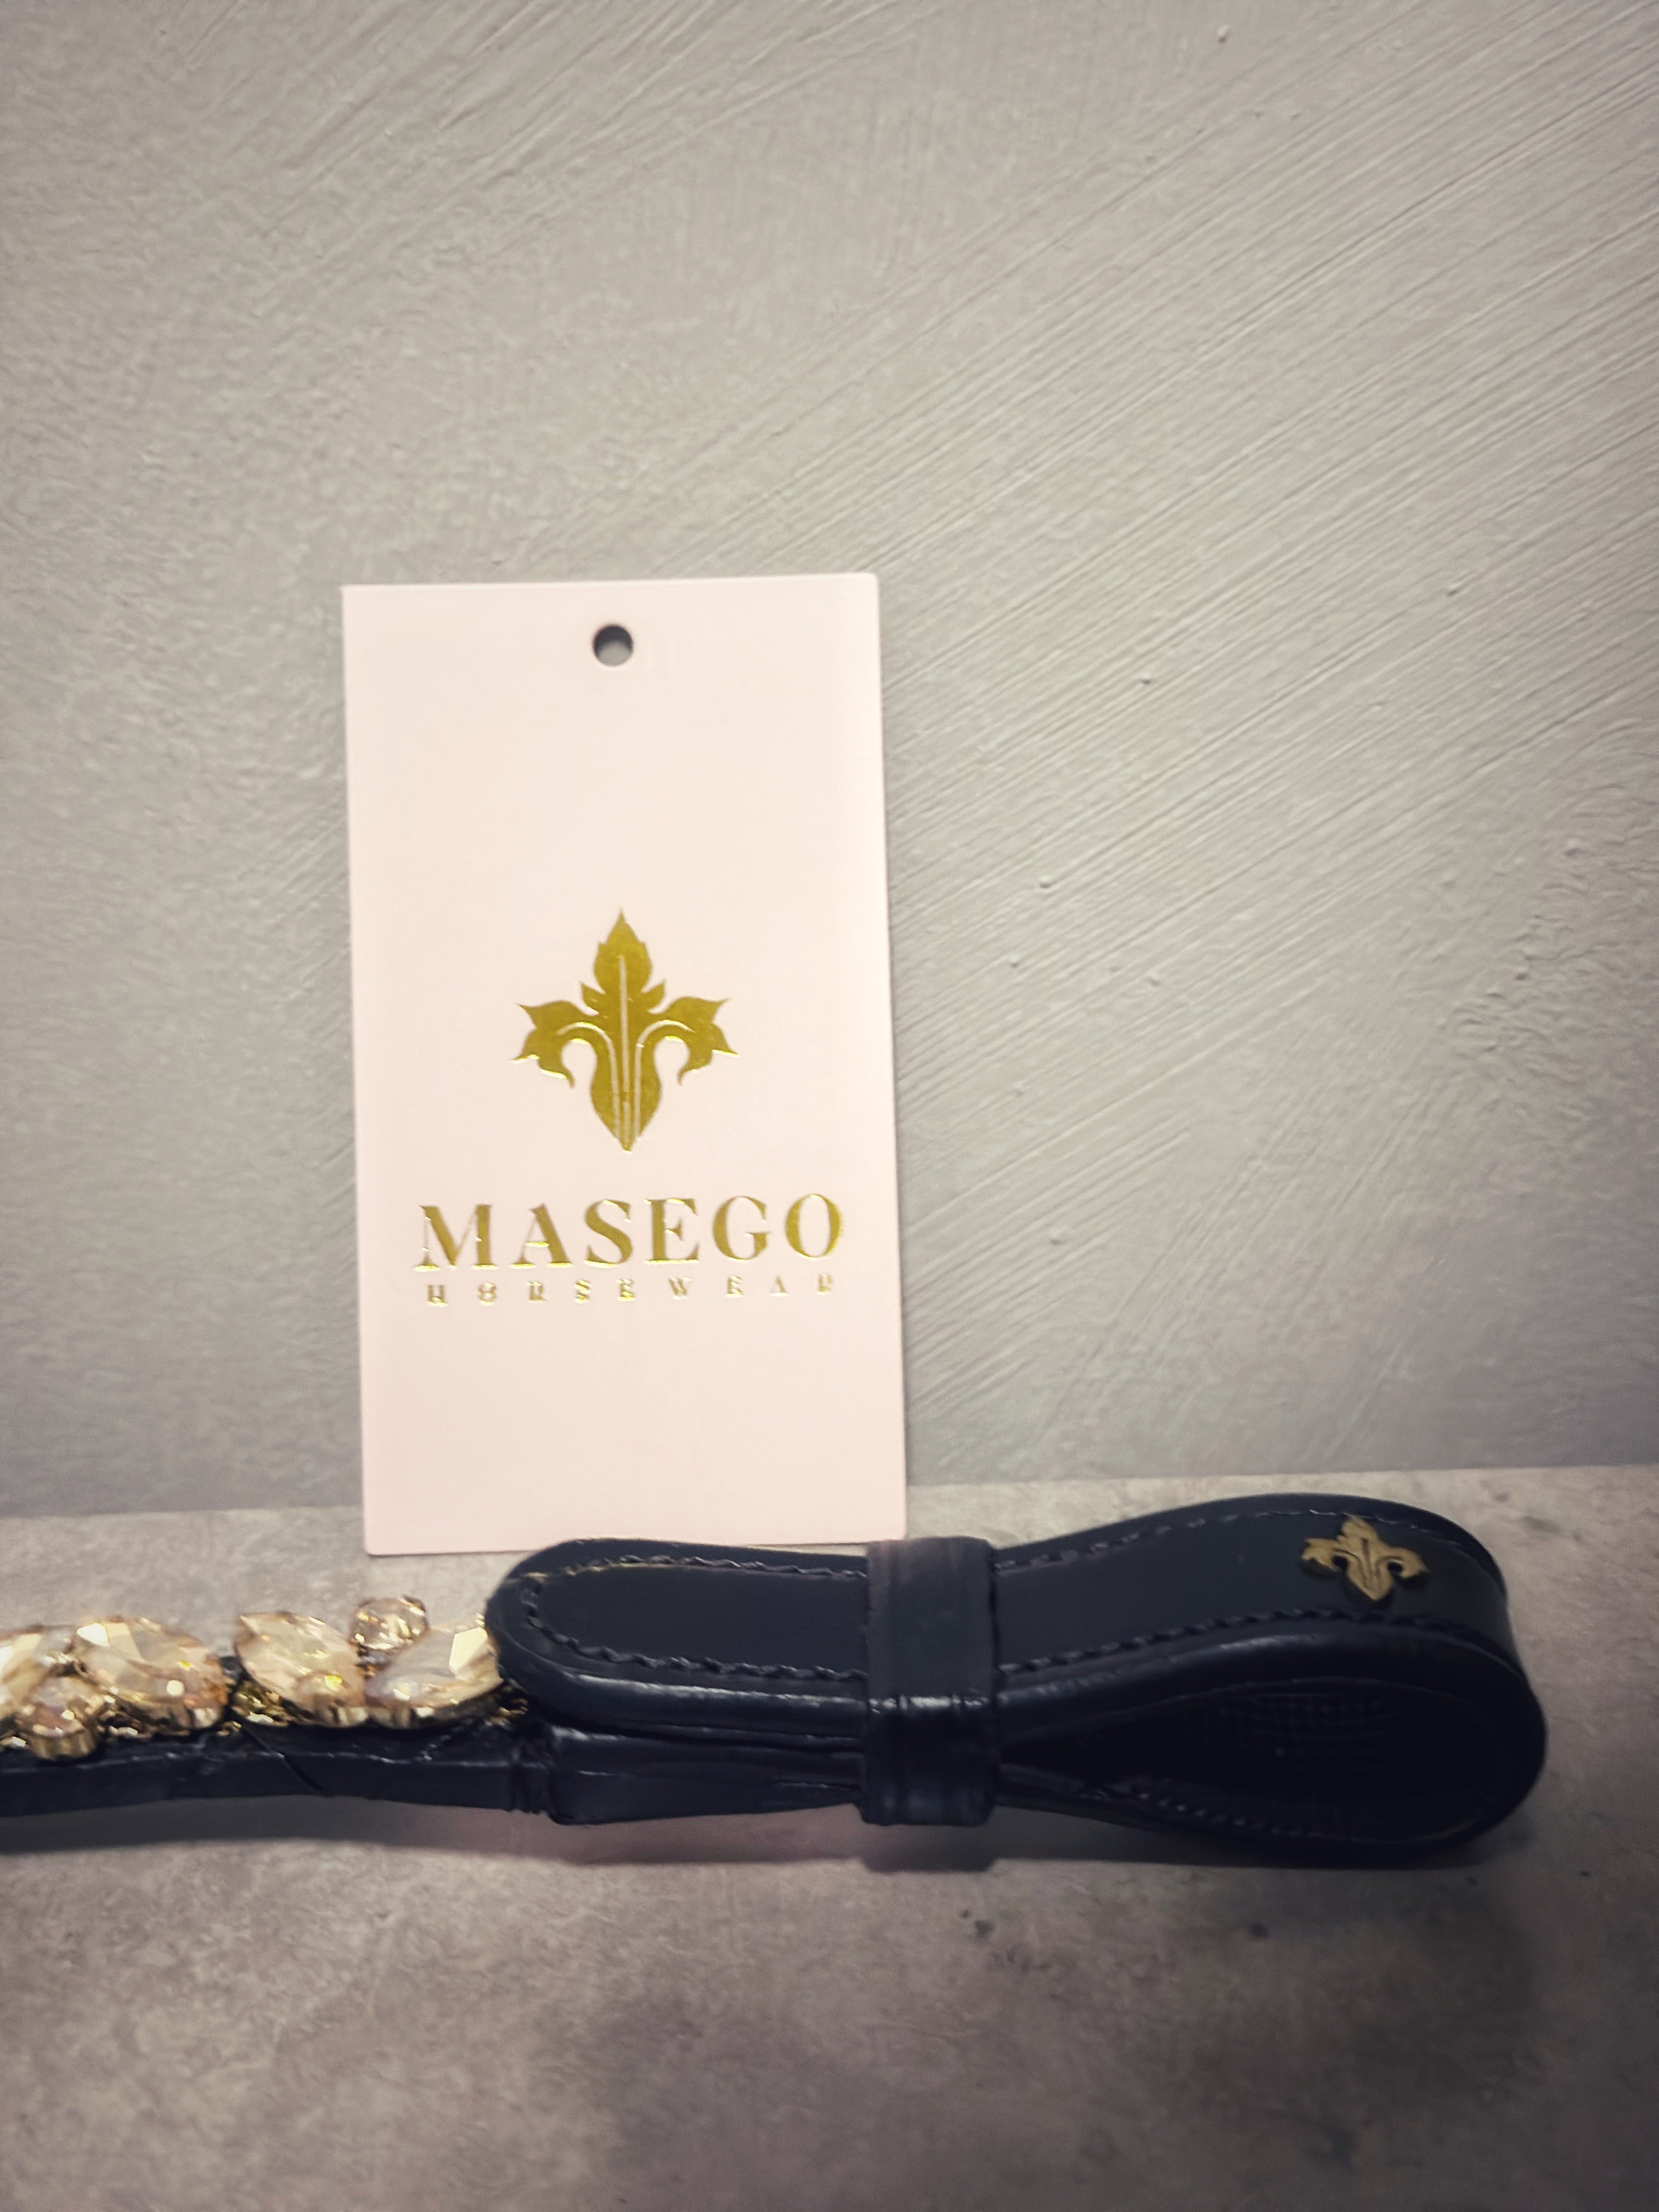 Masego Champagne Ivy Italian Leather Browband - Equiluxe Tack